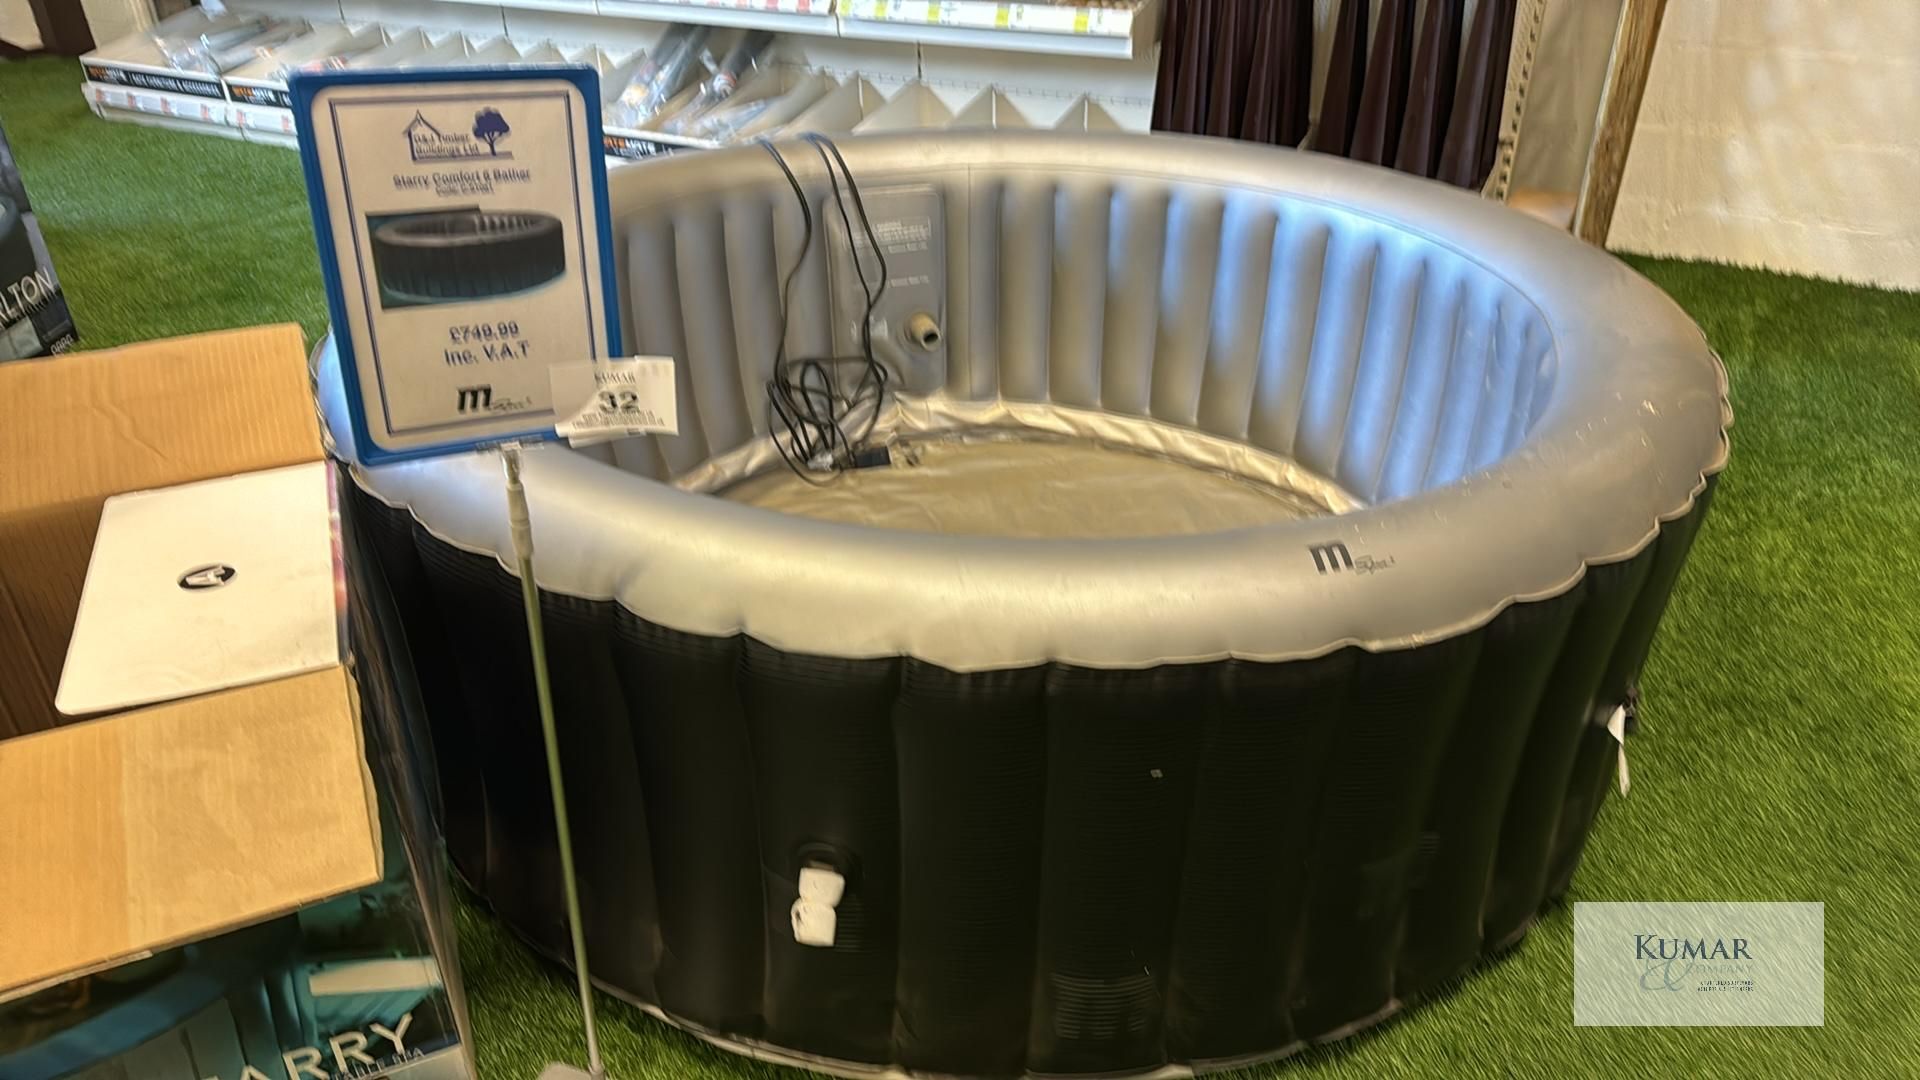 M Spa Starry Comfort Series C - ST061 6 Bather Inflatable Spa Display Model Never Been Used with Box - Image 15 of 15